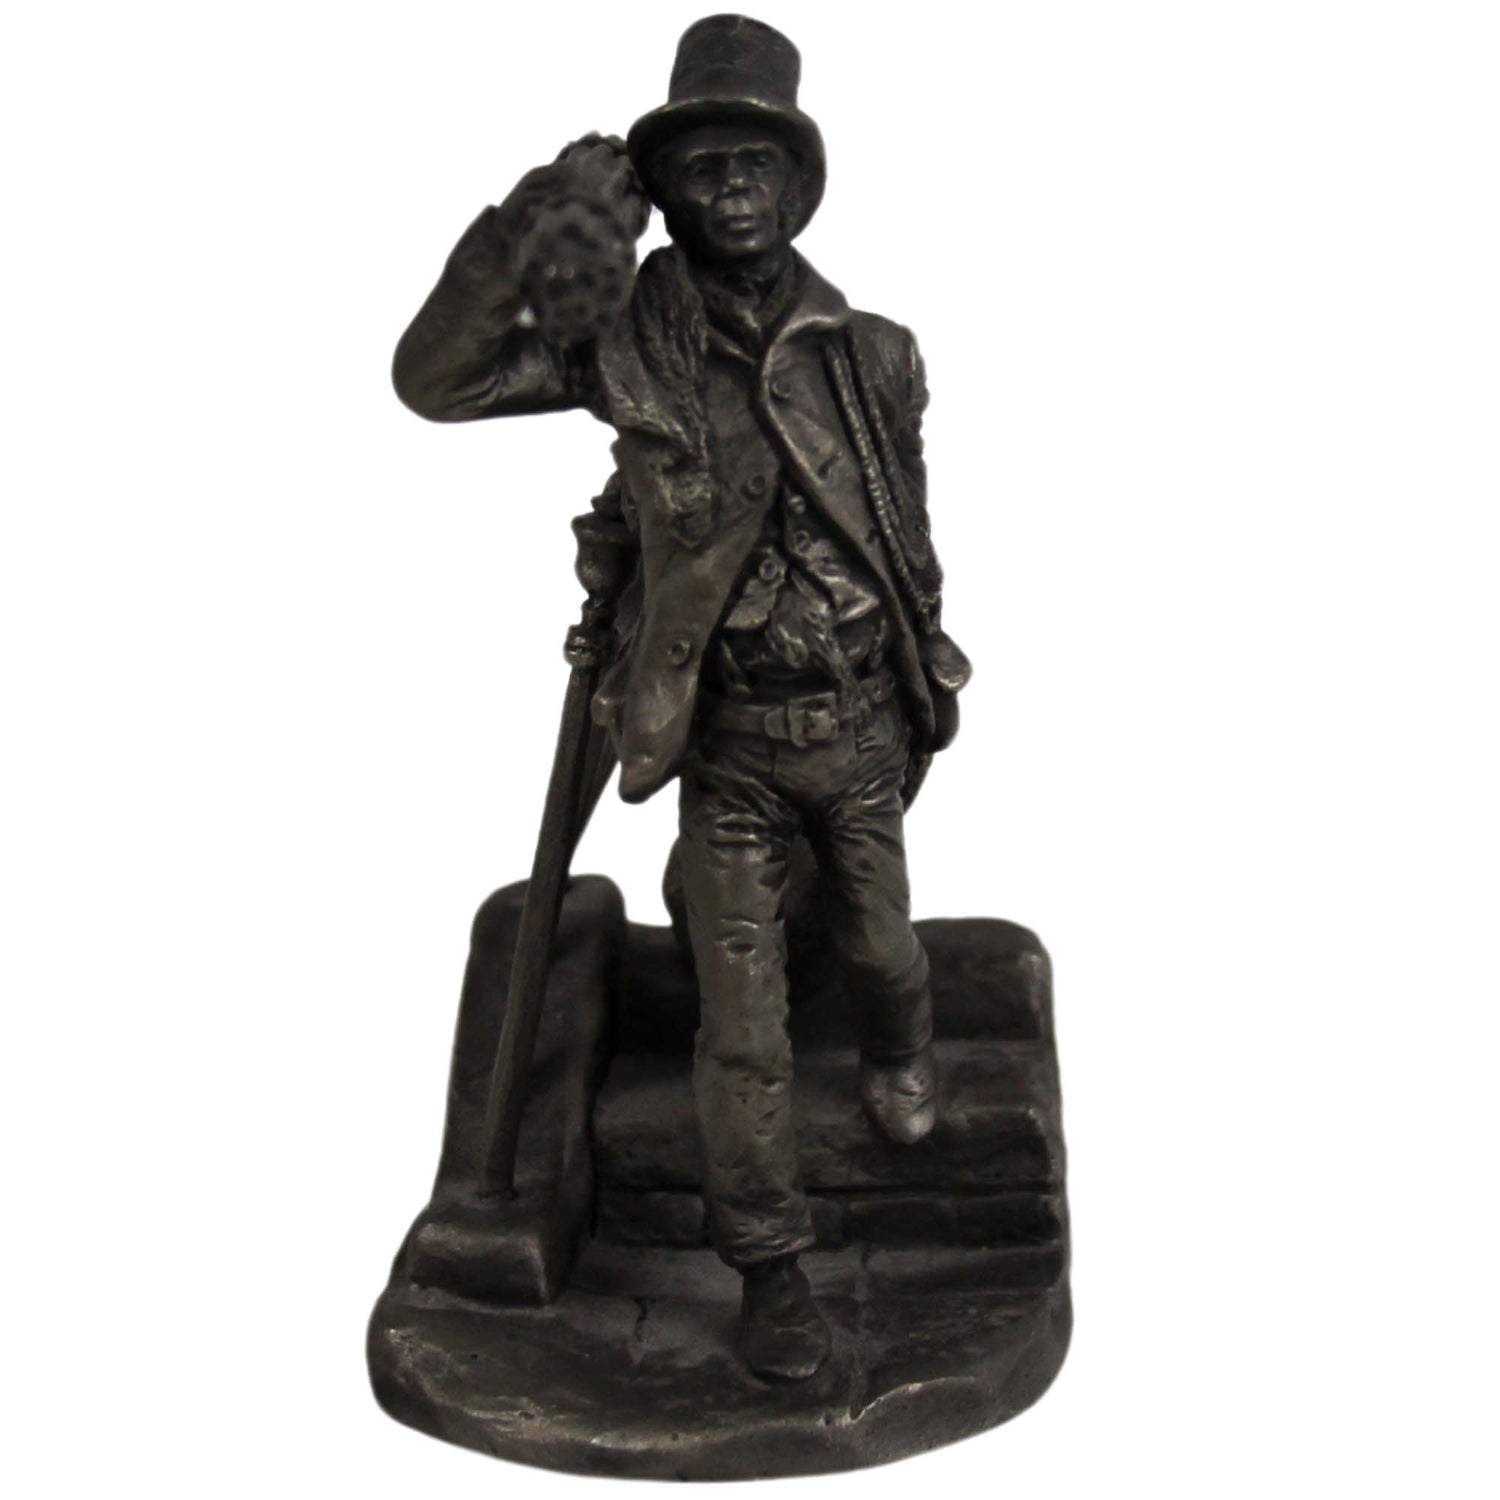 1977 Franklin Mint The Chimney Sweep Statue ZOOM